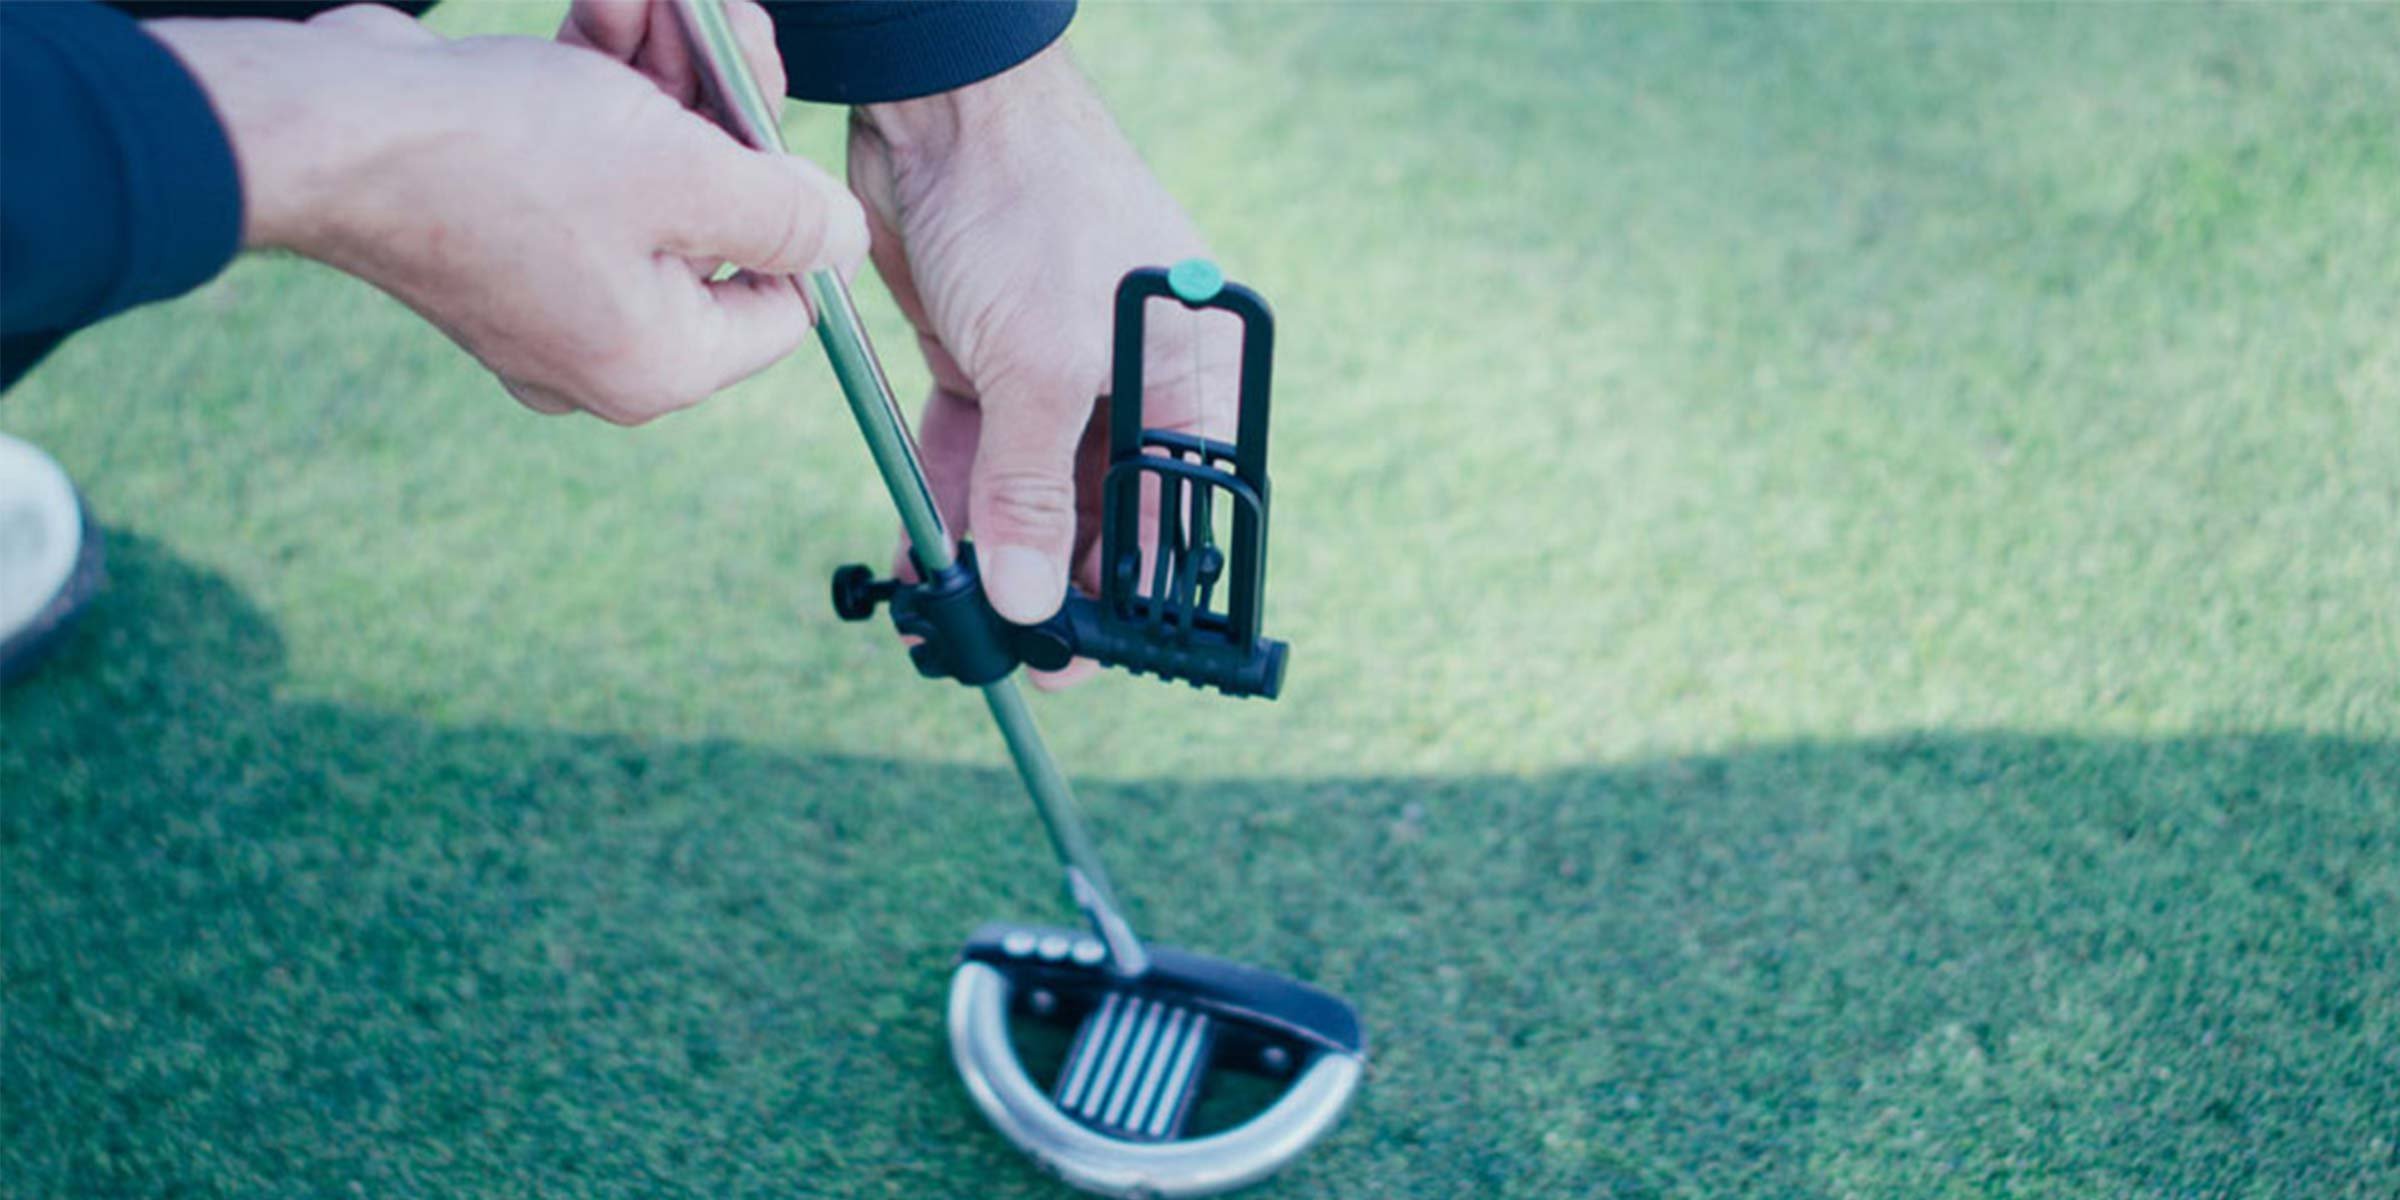 Clipping The Gatekeeper to a putter shaft